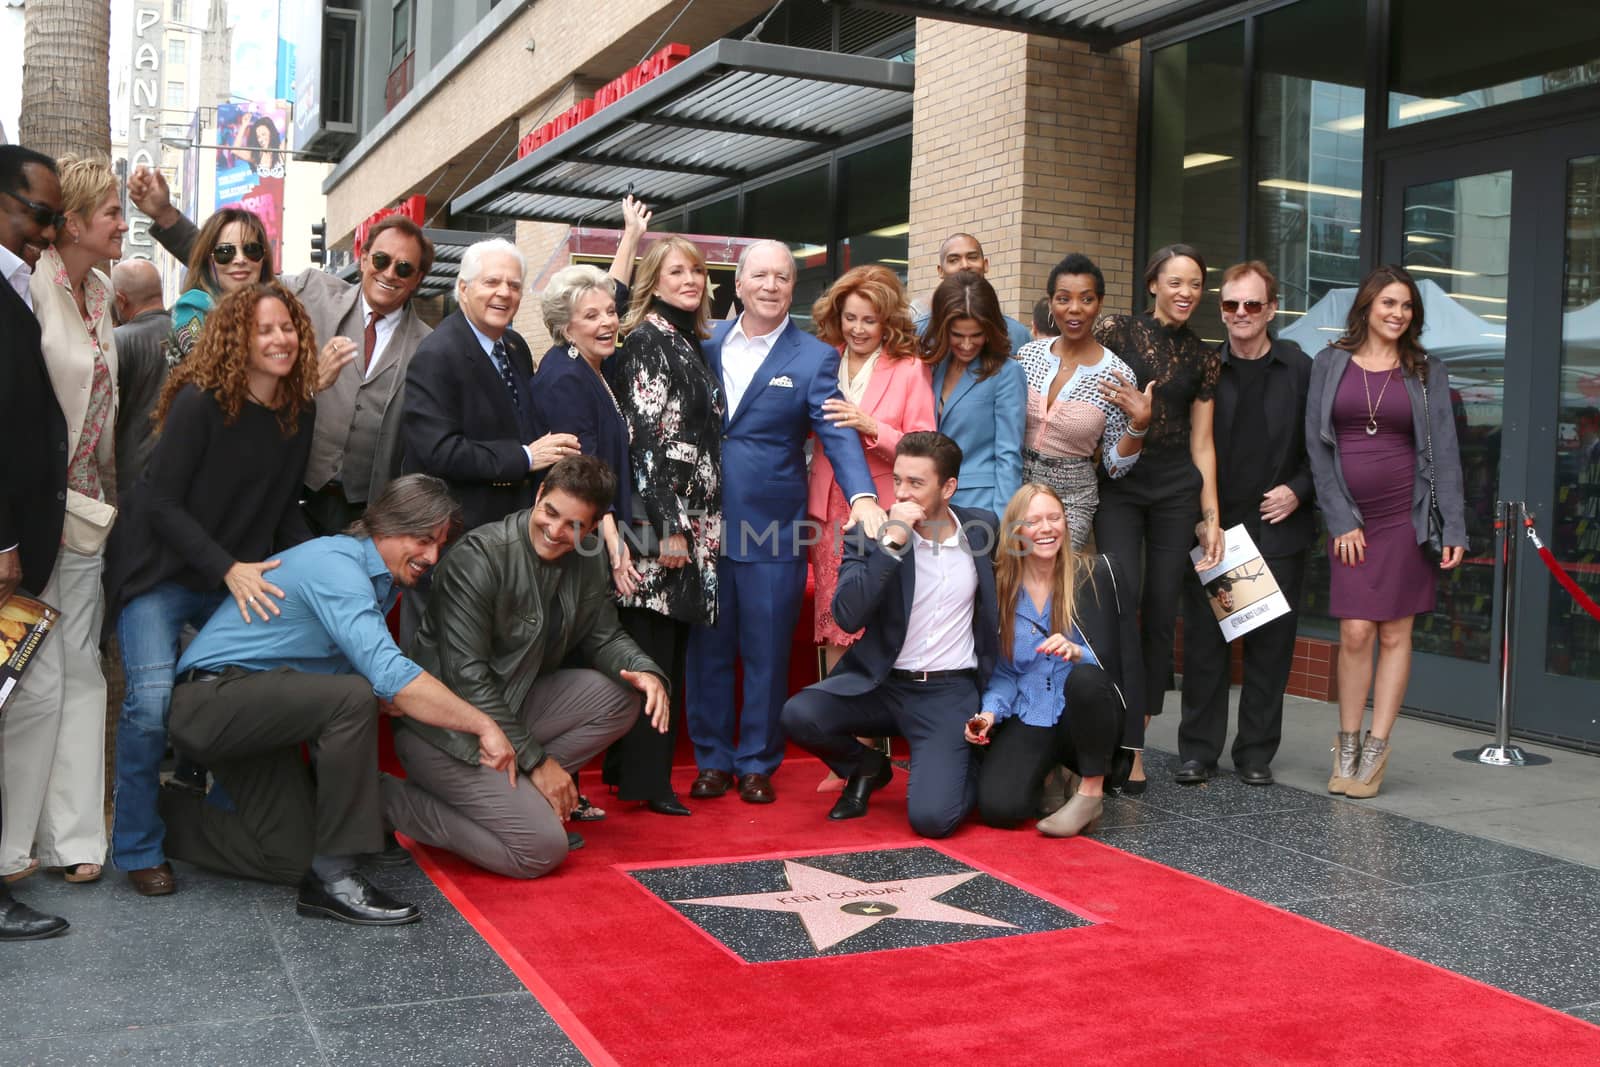 Days of Our Lives Cast Members, Ken Corday
at the Ken Corday Star Ceremony, Hollywood Walk of Fame, Hollywood, CA 05-17-17